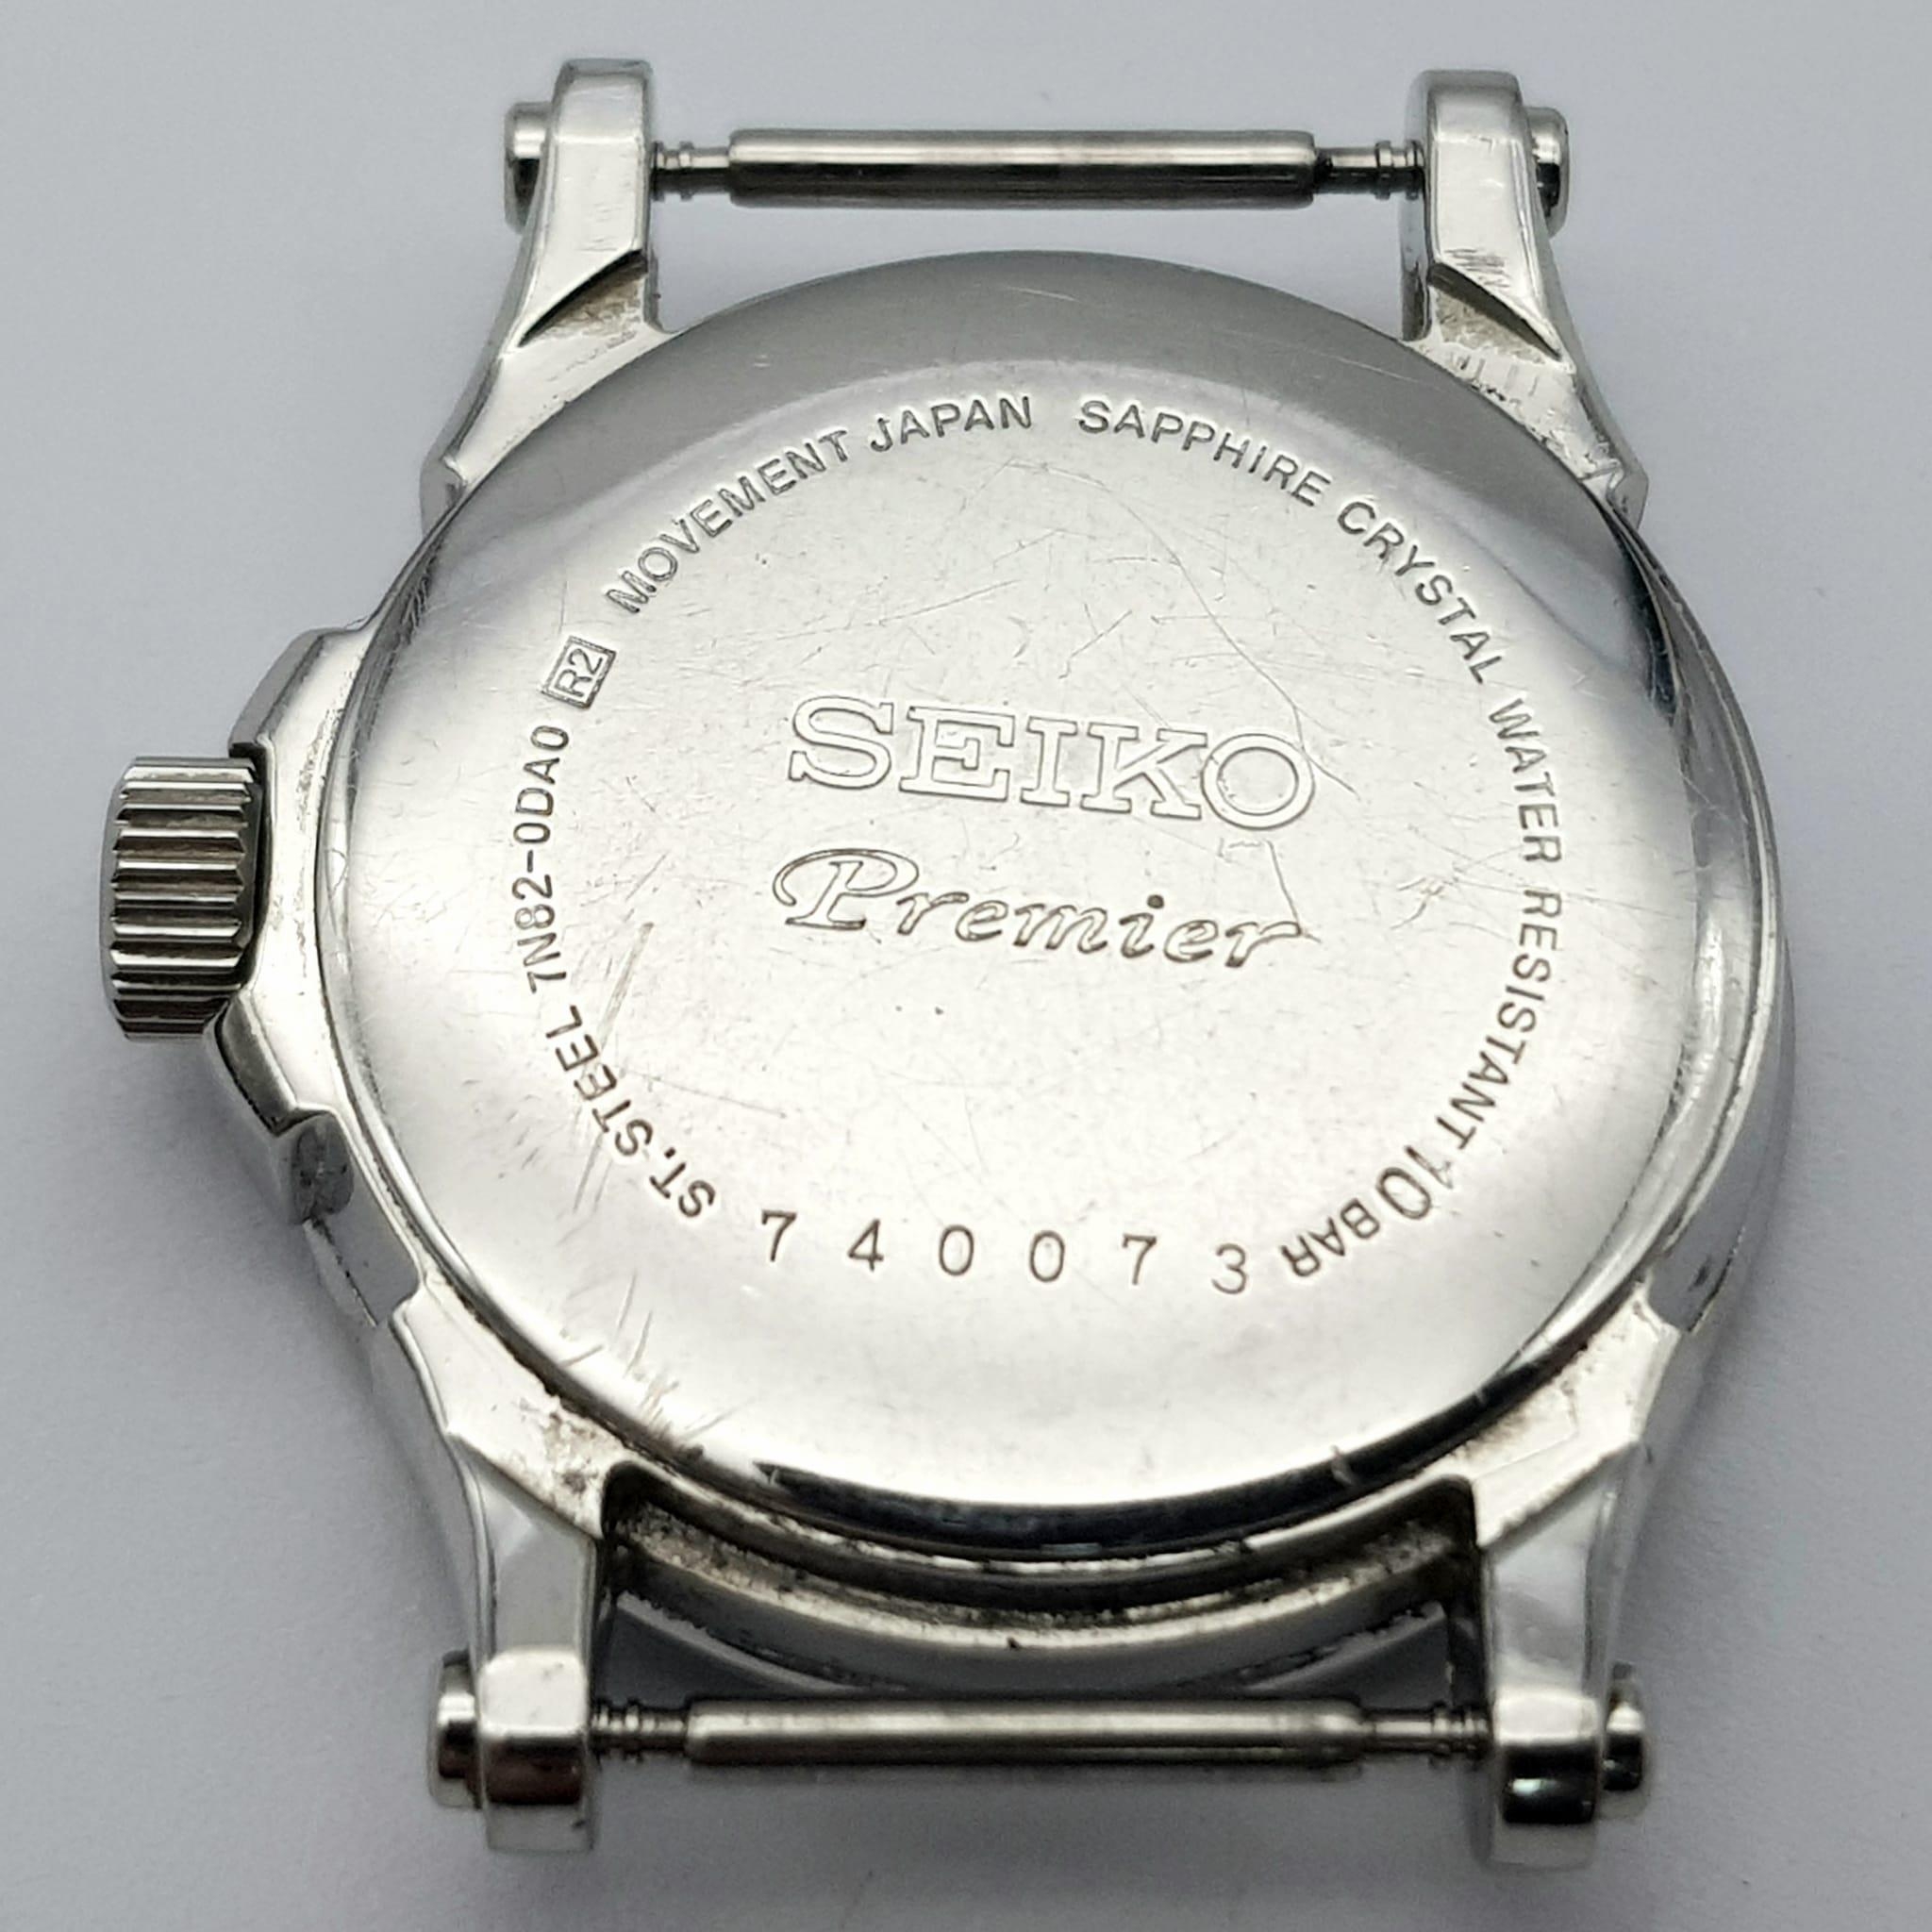 A Seiko Premier Ladies Diamond Watch Case. 27mm. Diamond bezel. Mother of pearl dial. In working - Image 6 of 7